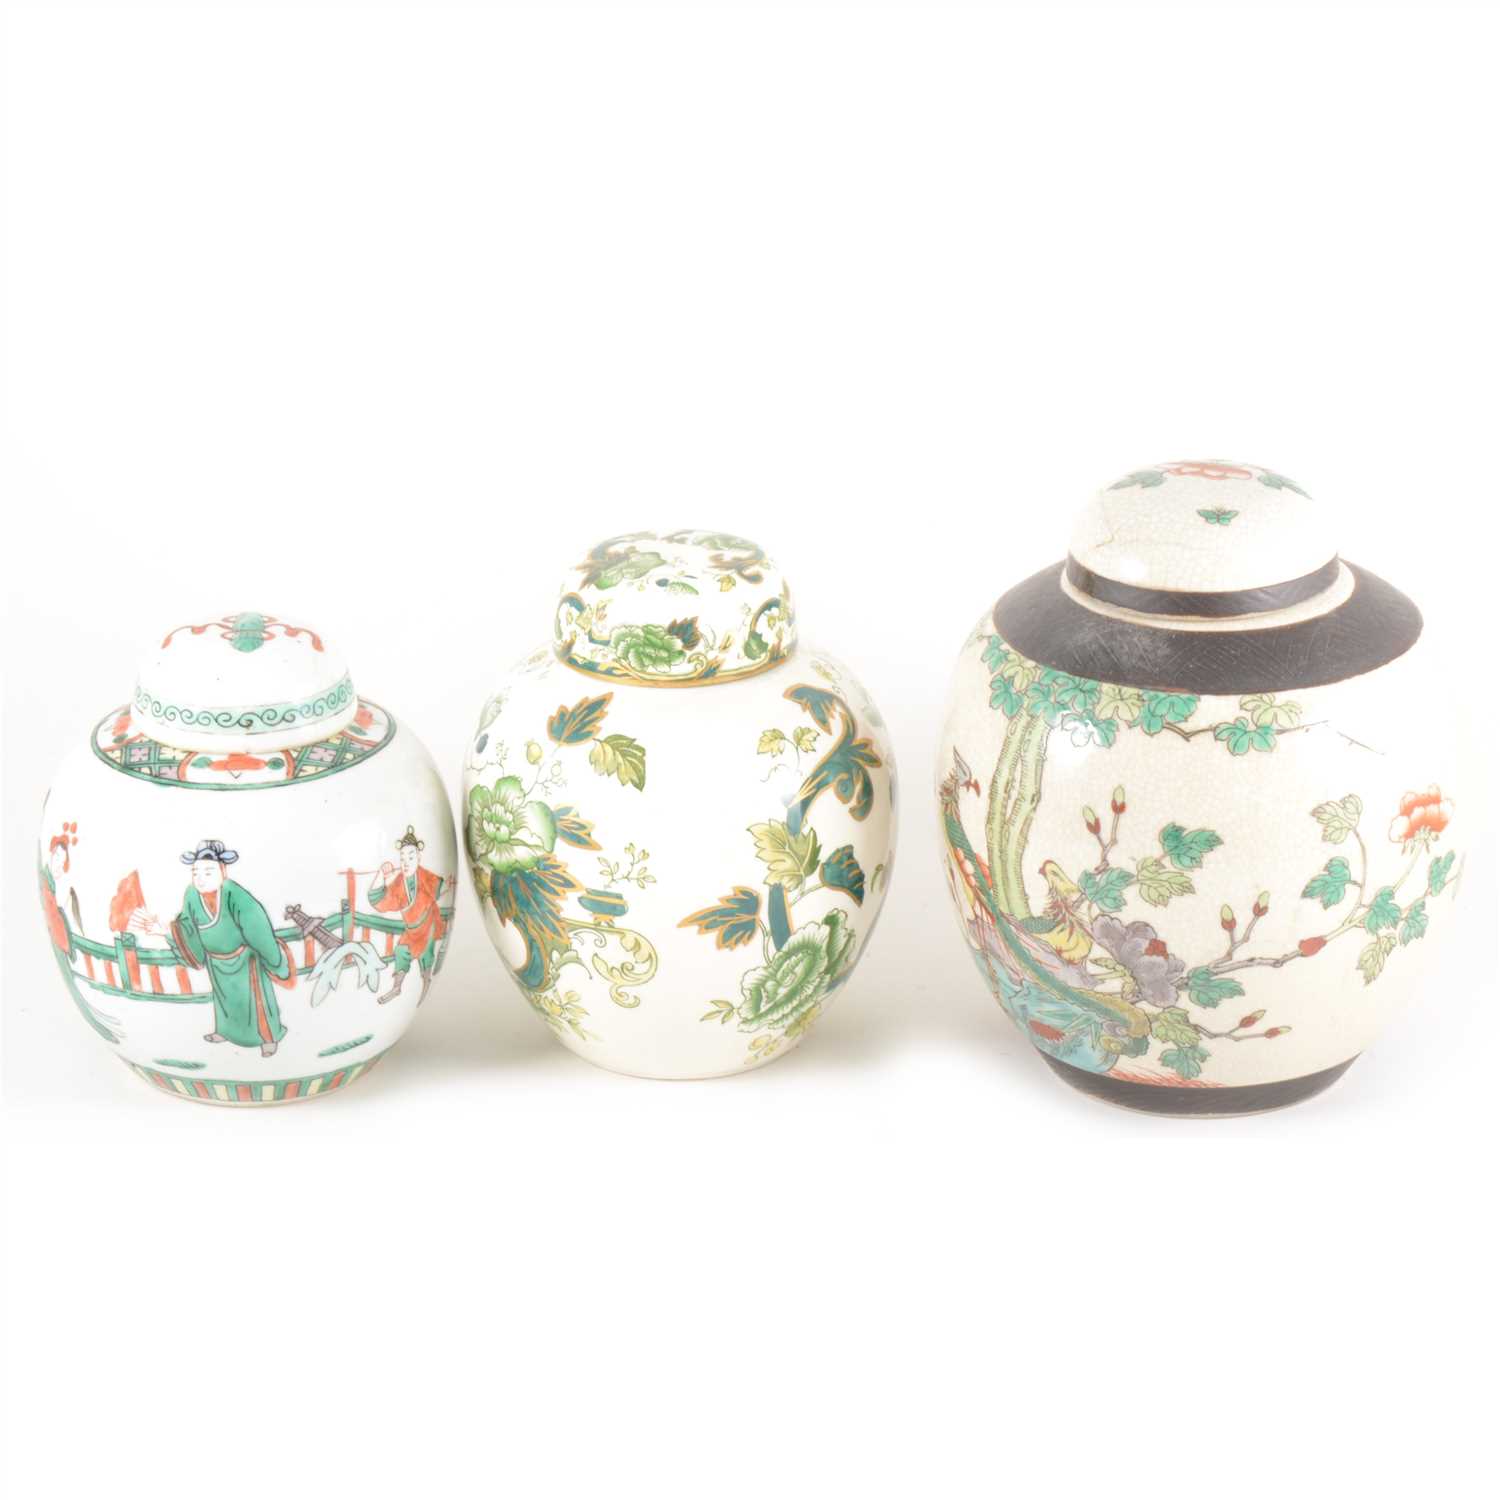 Lot 50 - Two modern Chinese ginger jars, a Masons ginger jar and cover, and a sectional food tray.